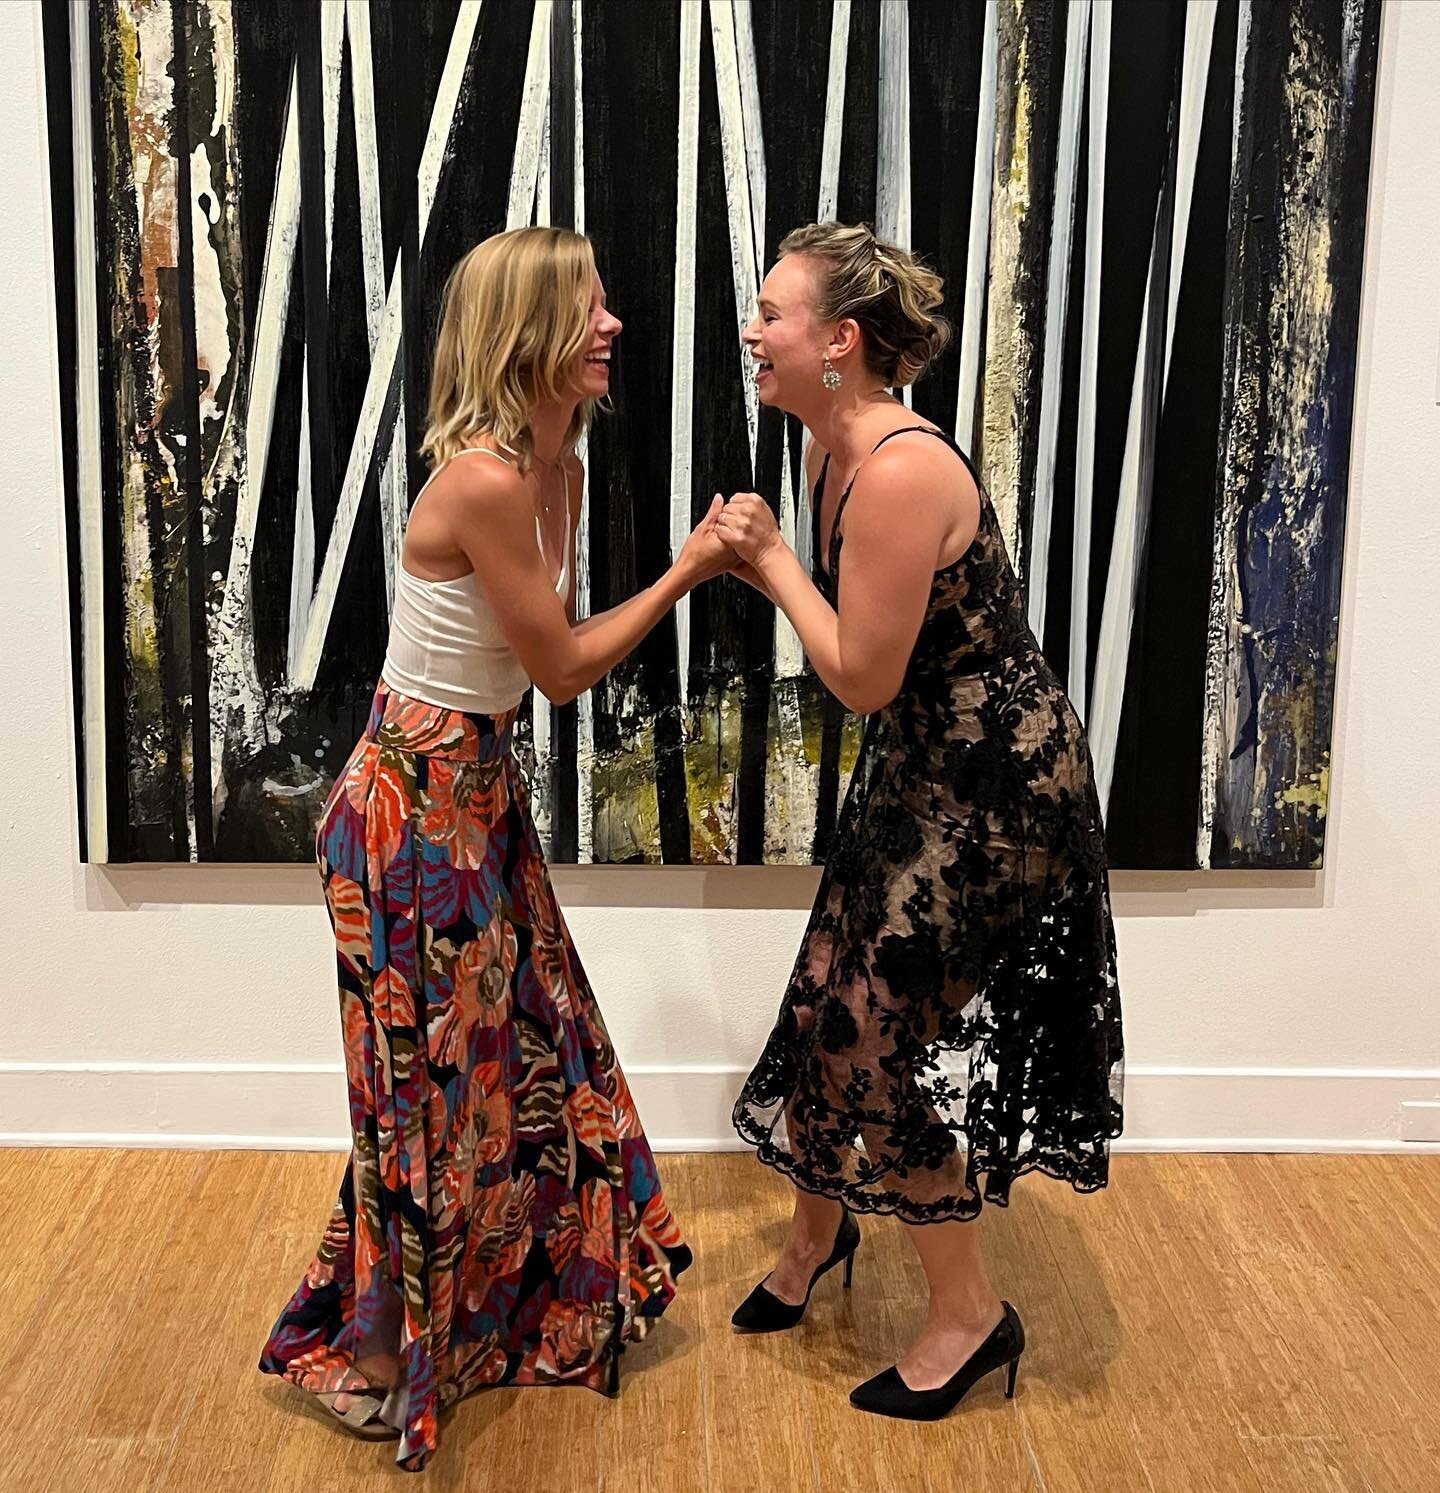 GREAT LOVE! @deannabreiwick is a sensational and nuanced artist and the absolute BEST recitalist you could ever even hope to hear! I feel so lucky to have been in the presence of such artistry at her recital at @lagunaartmuseum last night, and then t